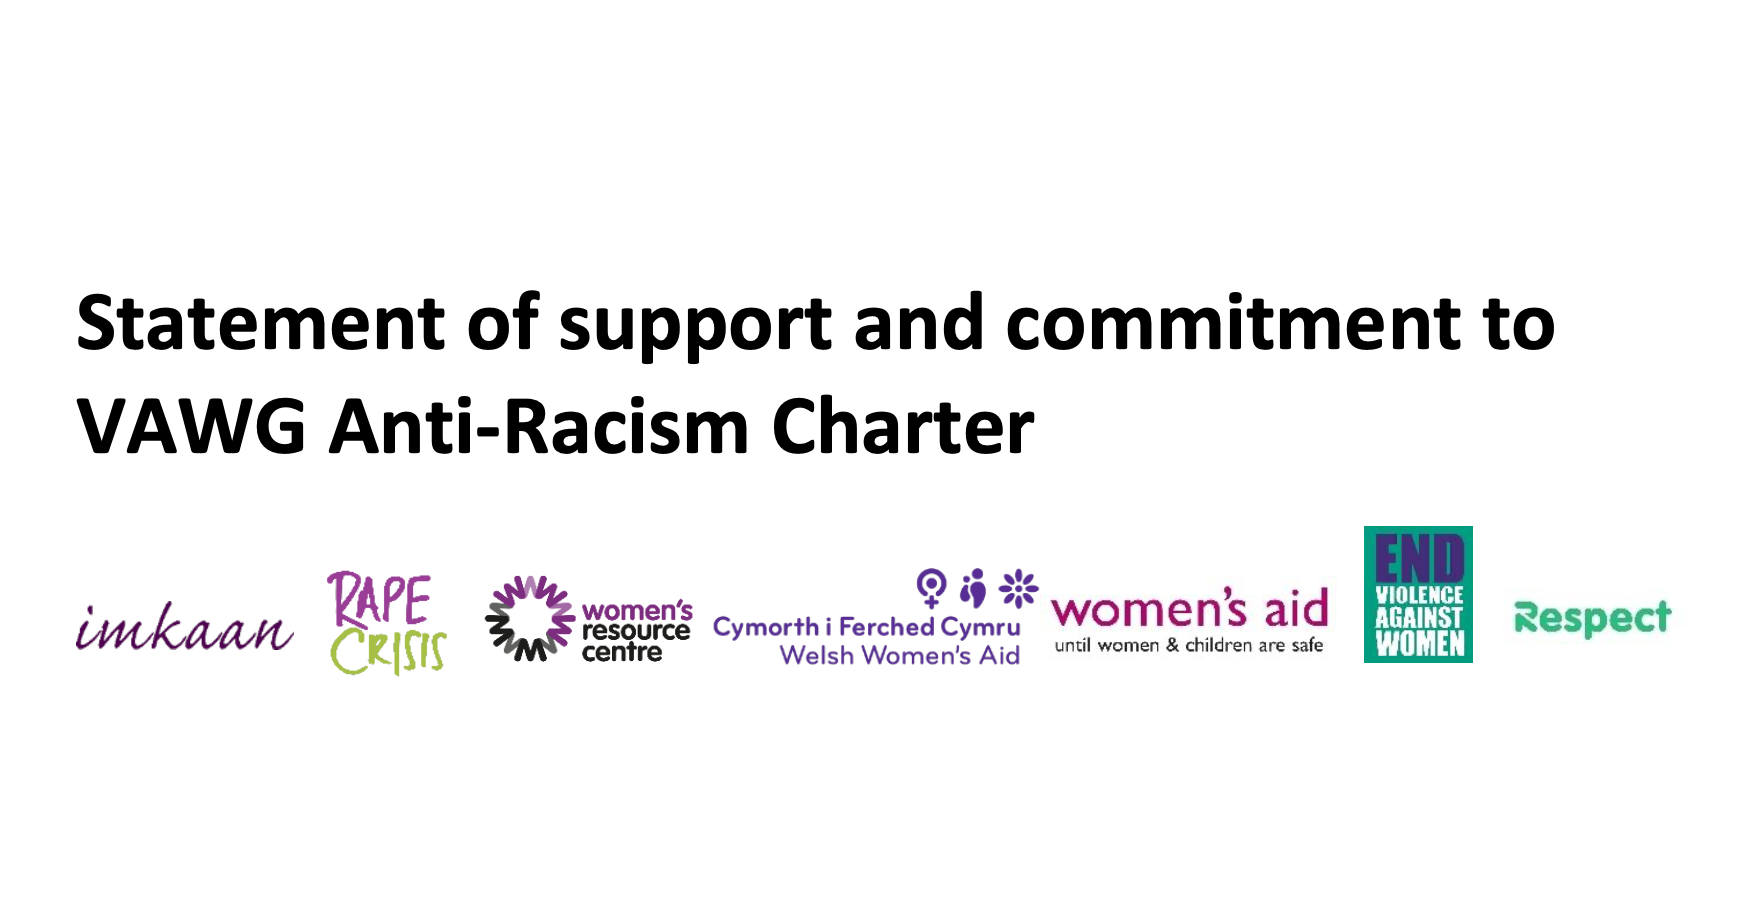 EVAW, Rape Crisis England & Wales, Imkaan, Welsh Women's Aid, Women's Aid, The Women's Resource Centre And Respect Logos